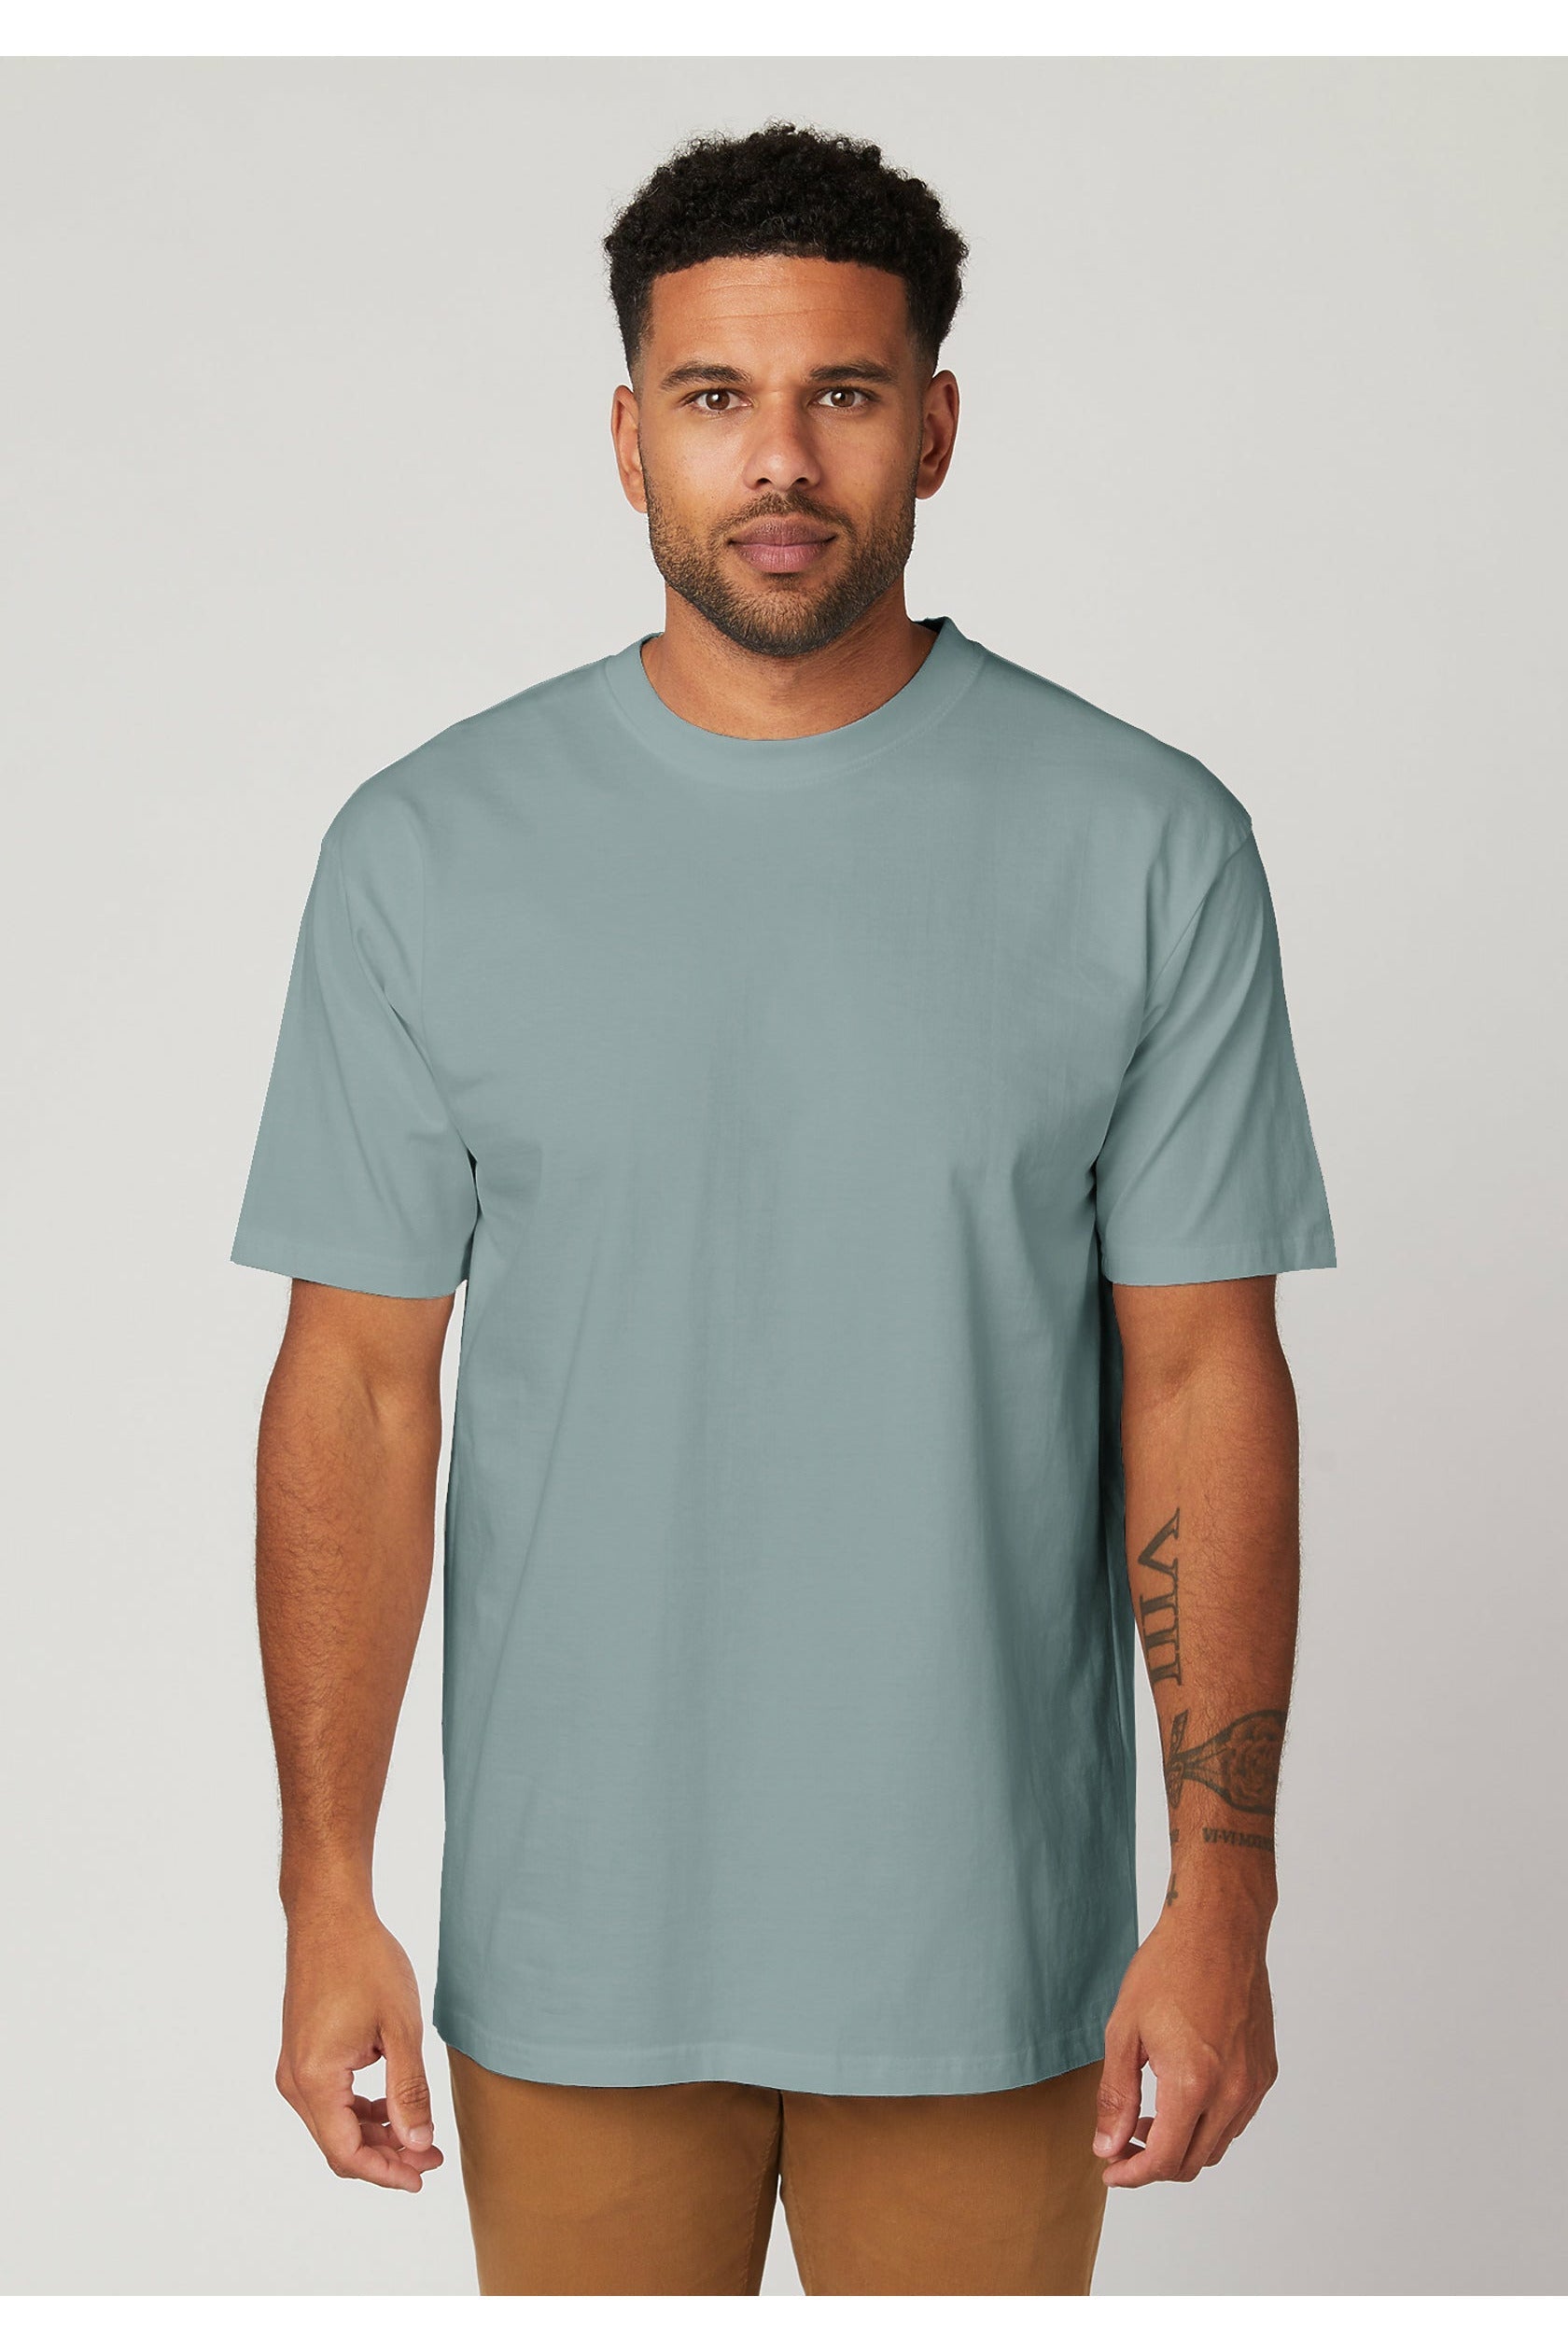 Heavy Weight T-shirt Mock up (See your logo on the garment) - BRNDURNAME